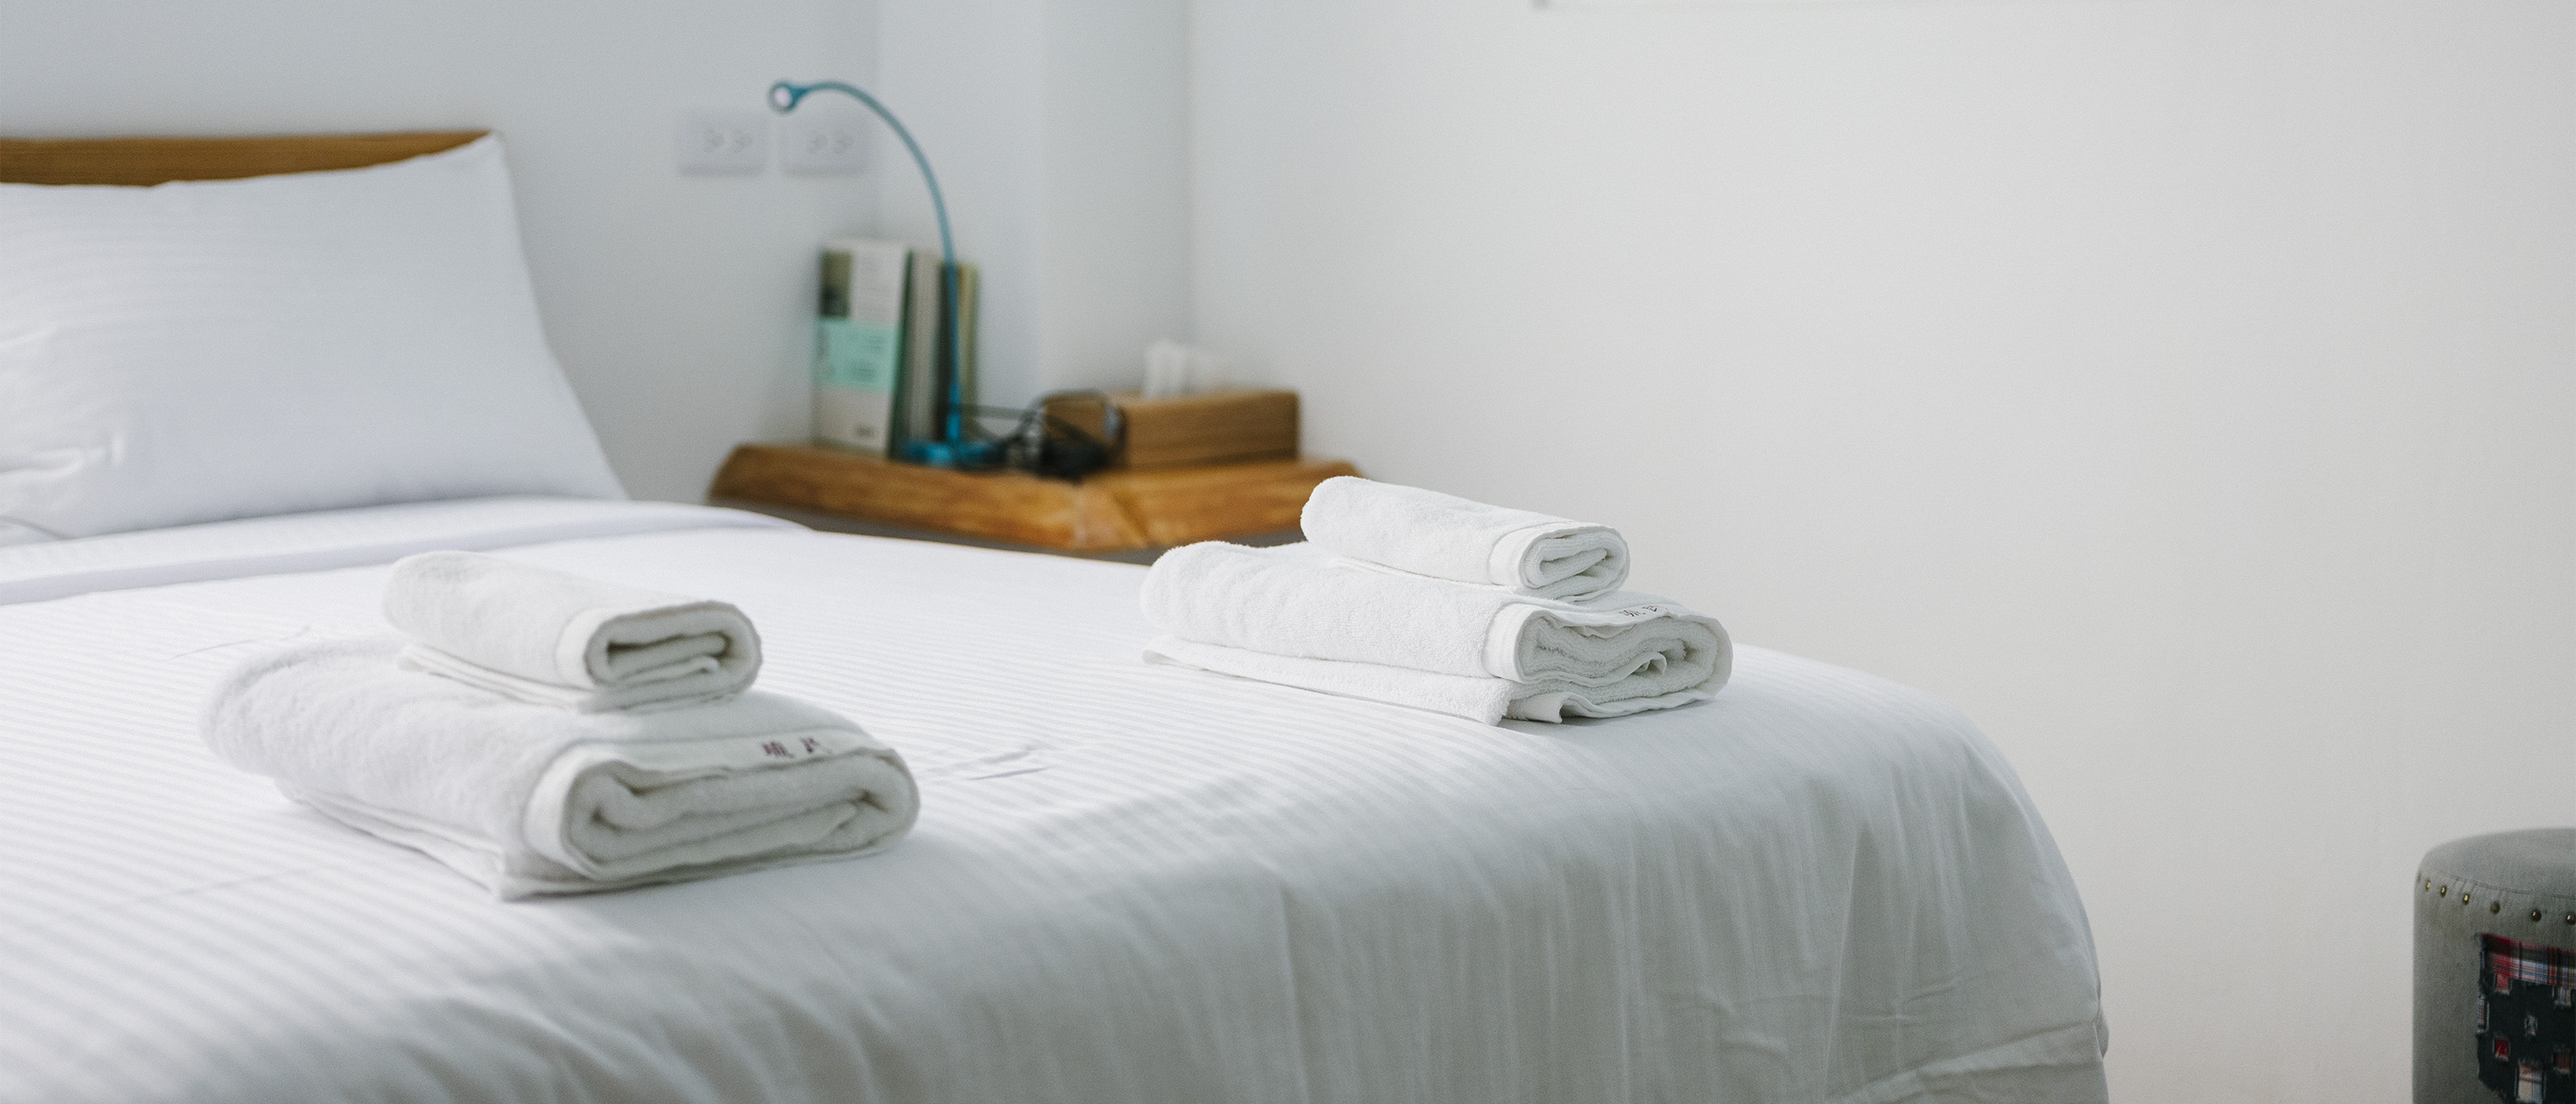 Two sets of clean towels rest at the end of a white bed in an Airbnb listing.